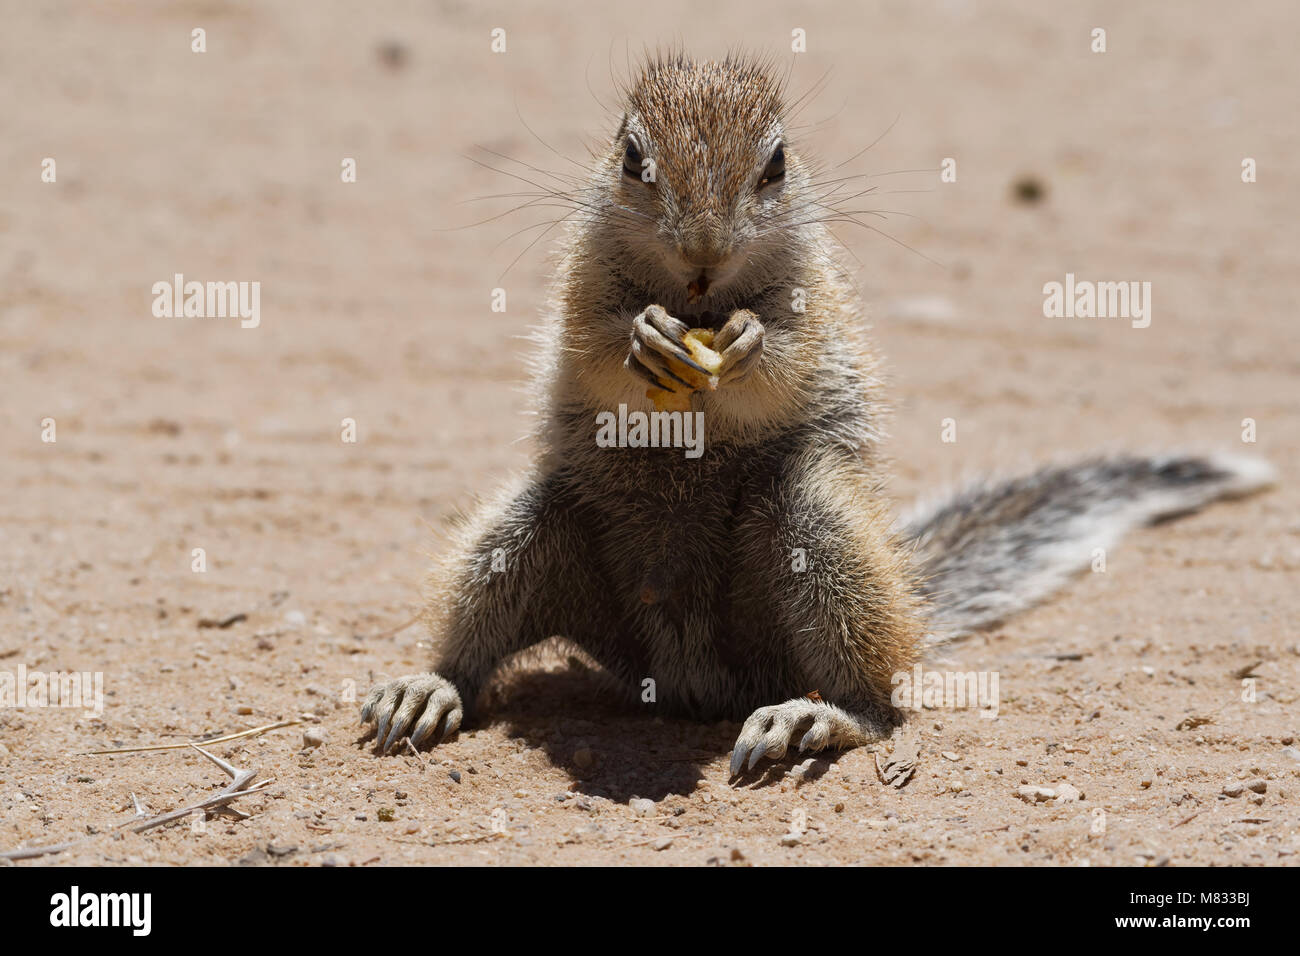 Cape ground squirrel (Xerus inauris), male, feeding on a piece of apple at Mata-Mata rest camp, Kgalagadi Transfrontier Park, Northern Cape, South Afr Stock Photo